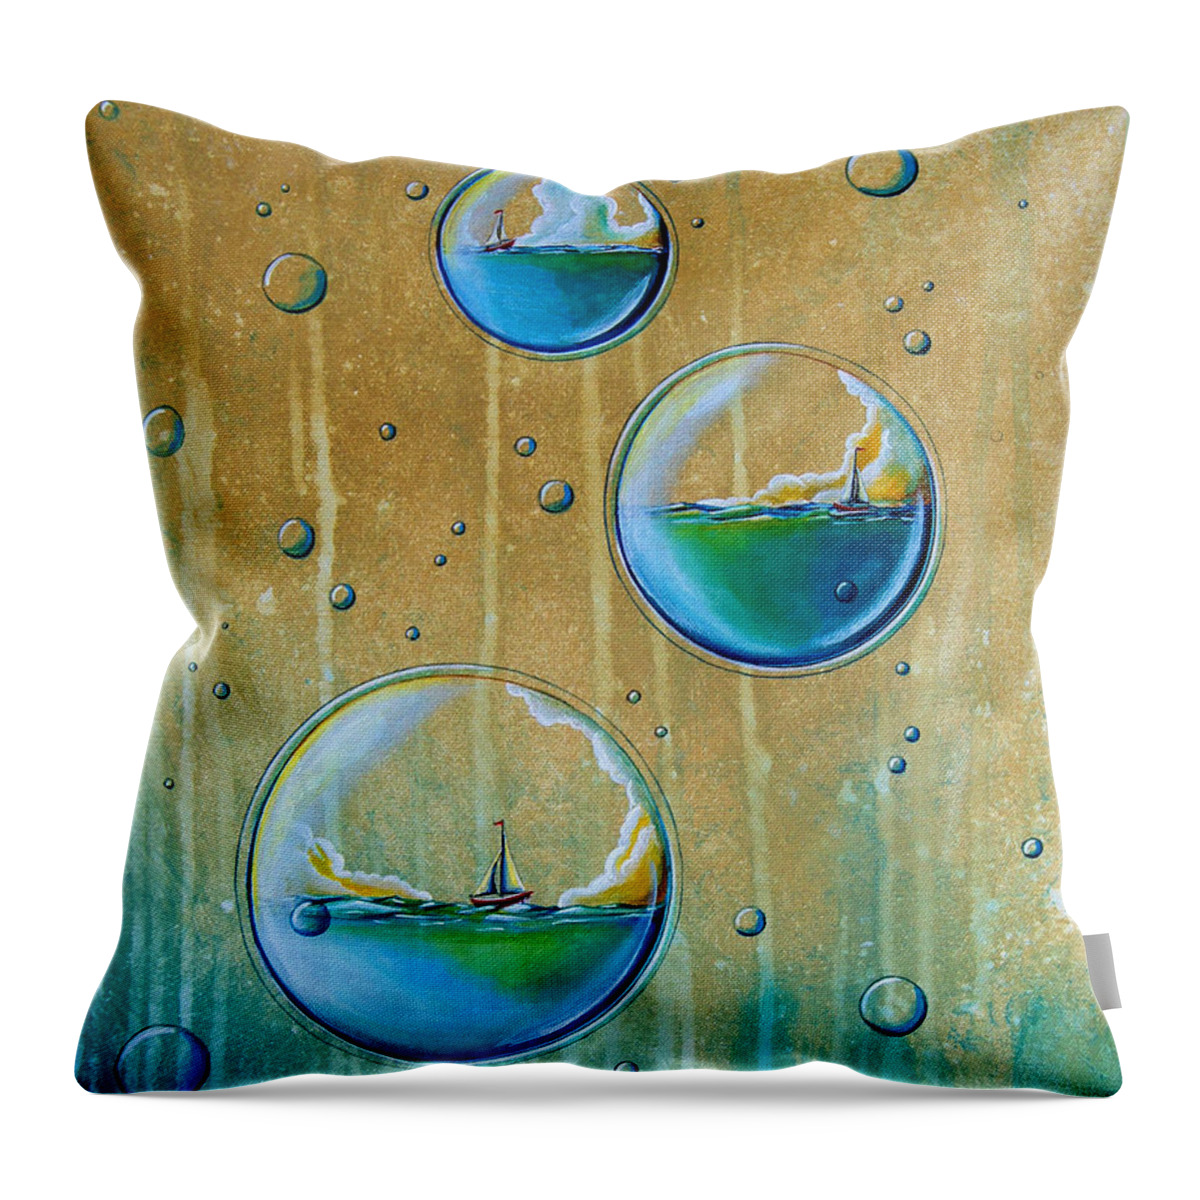 Sailing Throw Pillow featuring the painting Traveling In Circles by Cindy Thornton